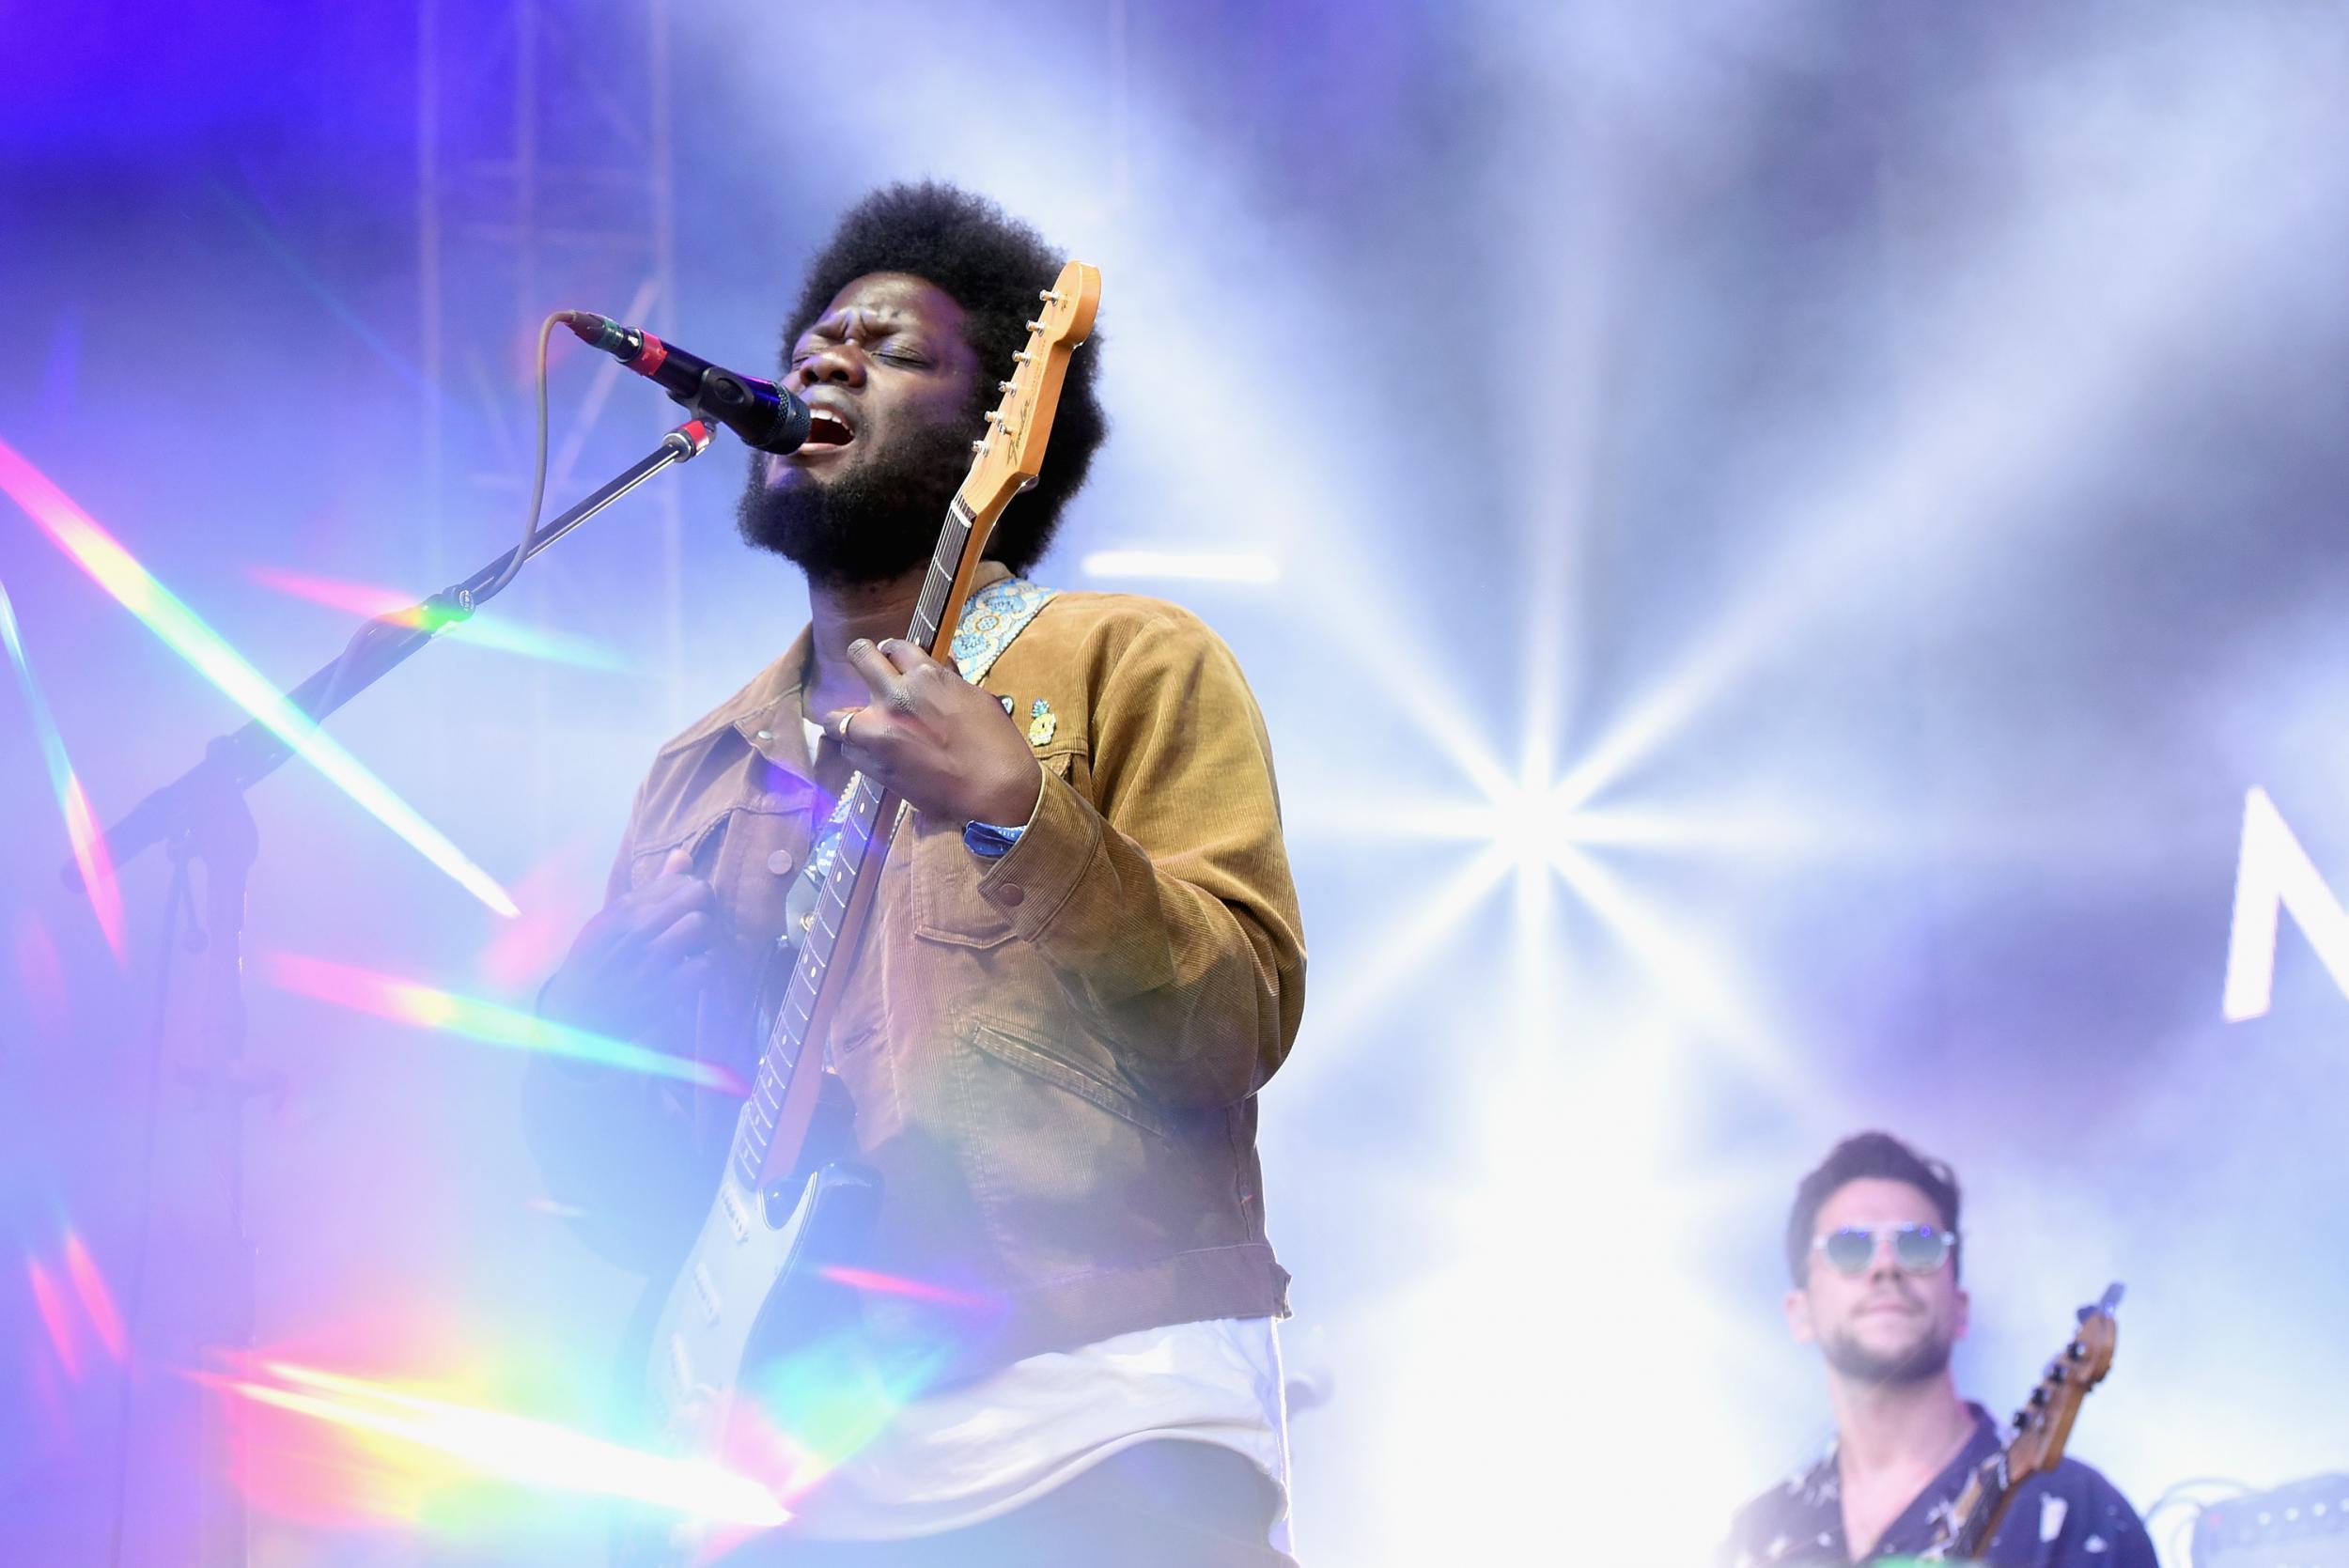 Michael Kiwanuka performs live at The Governers Ball Music Festival